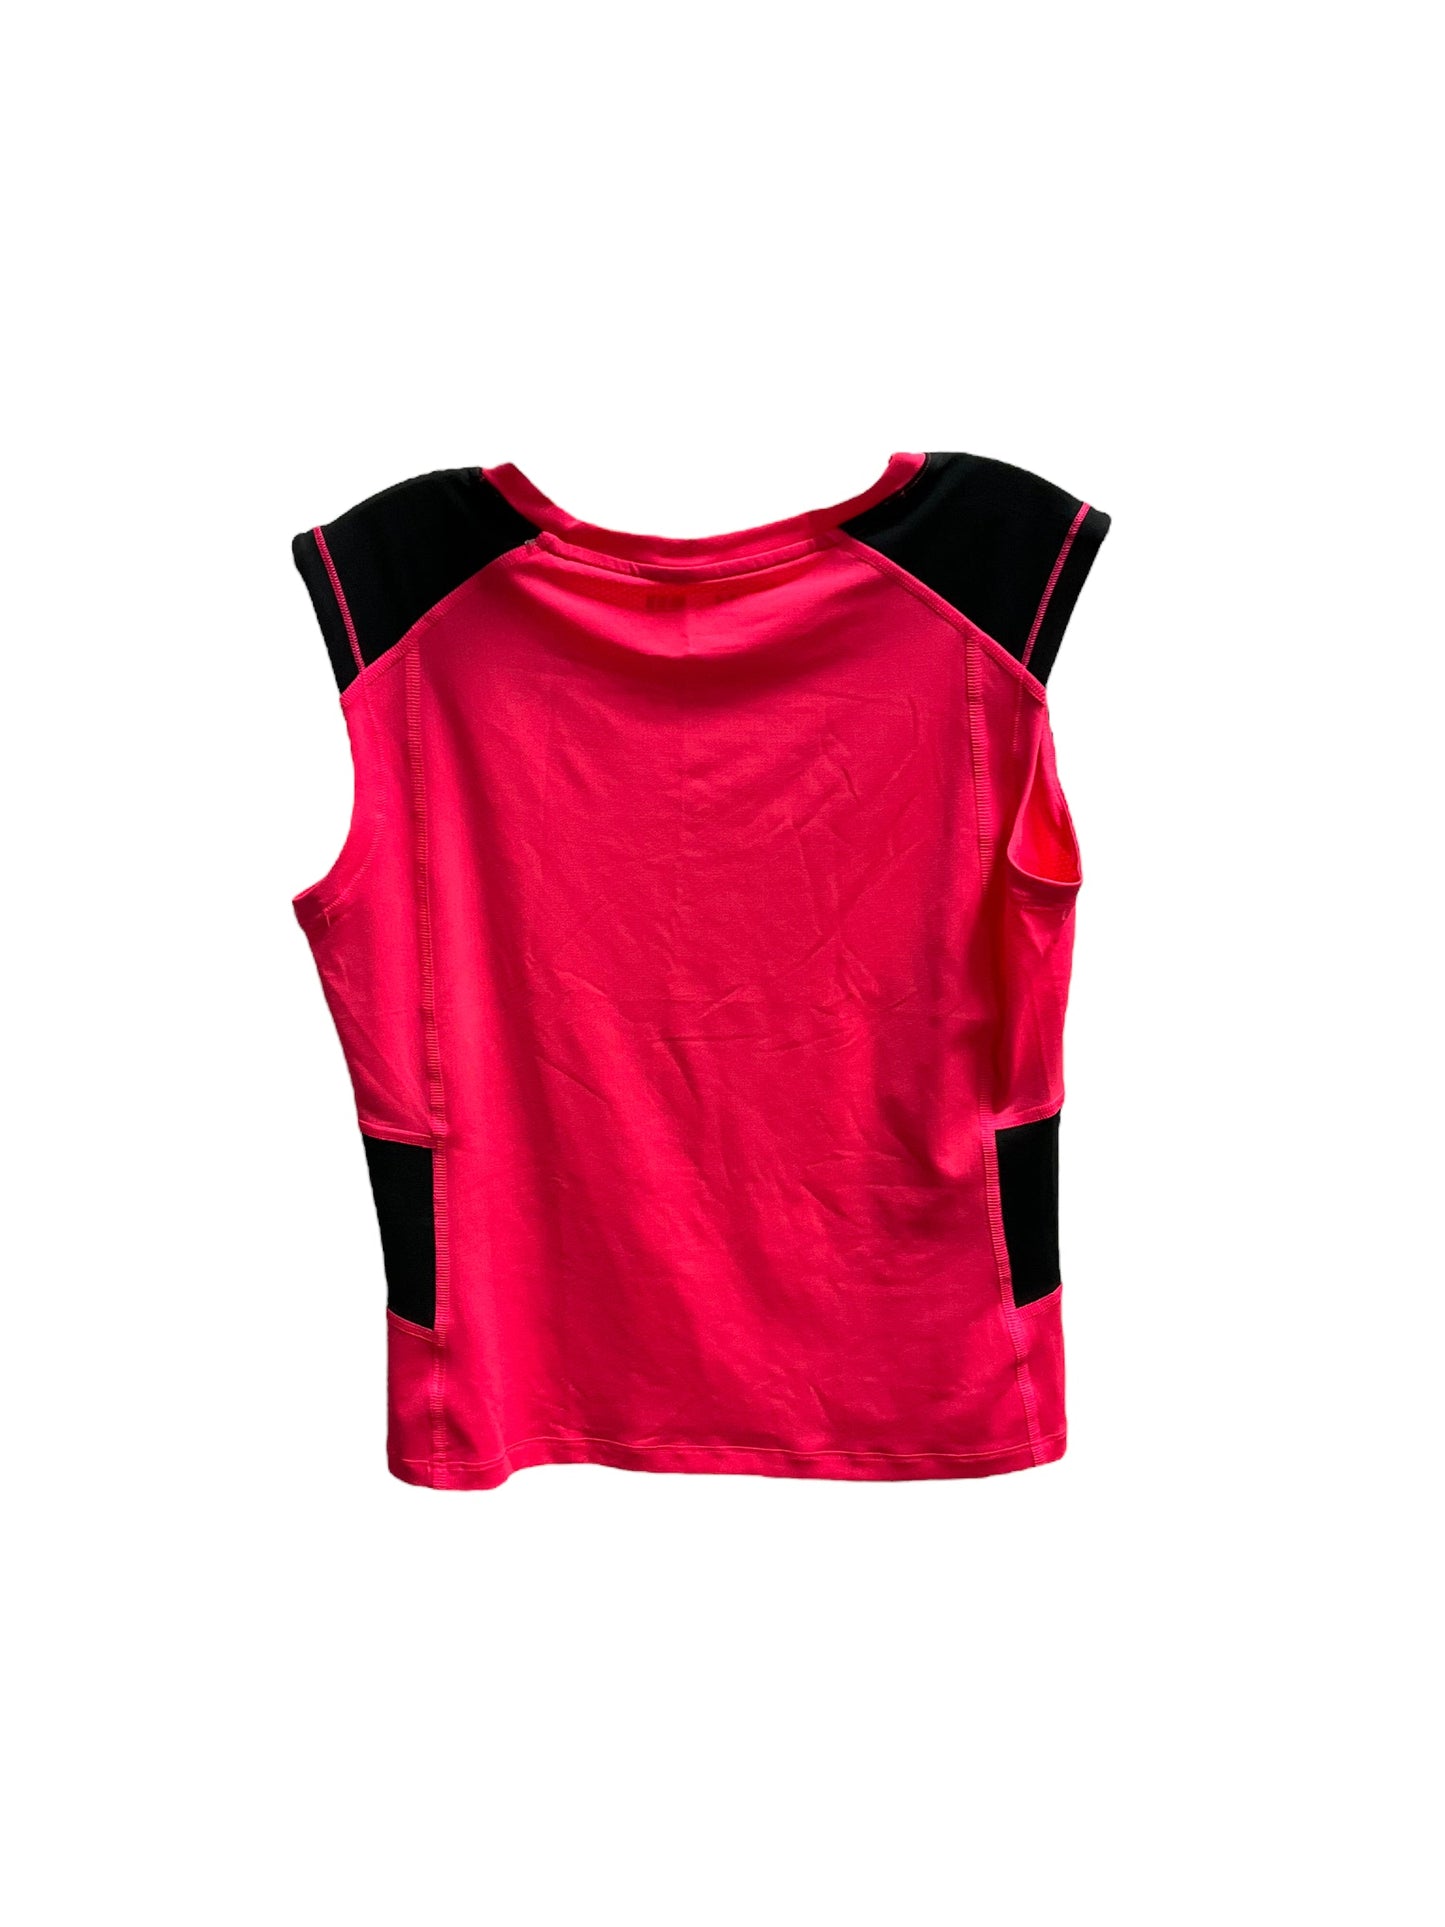 Black & Red Athletic Top Short Sleeve Under Armour, Size M